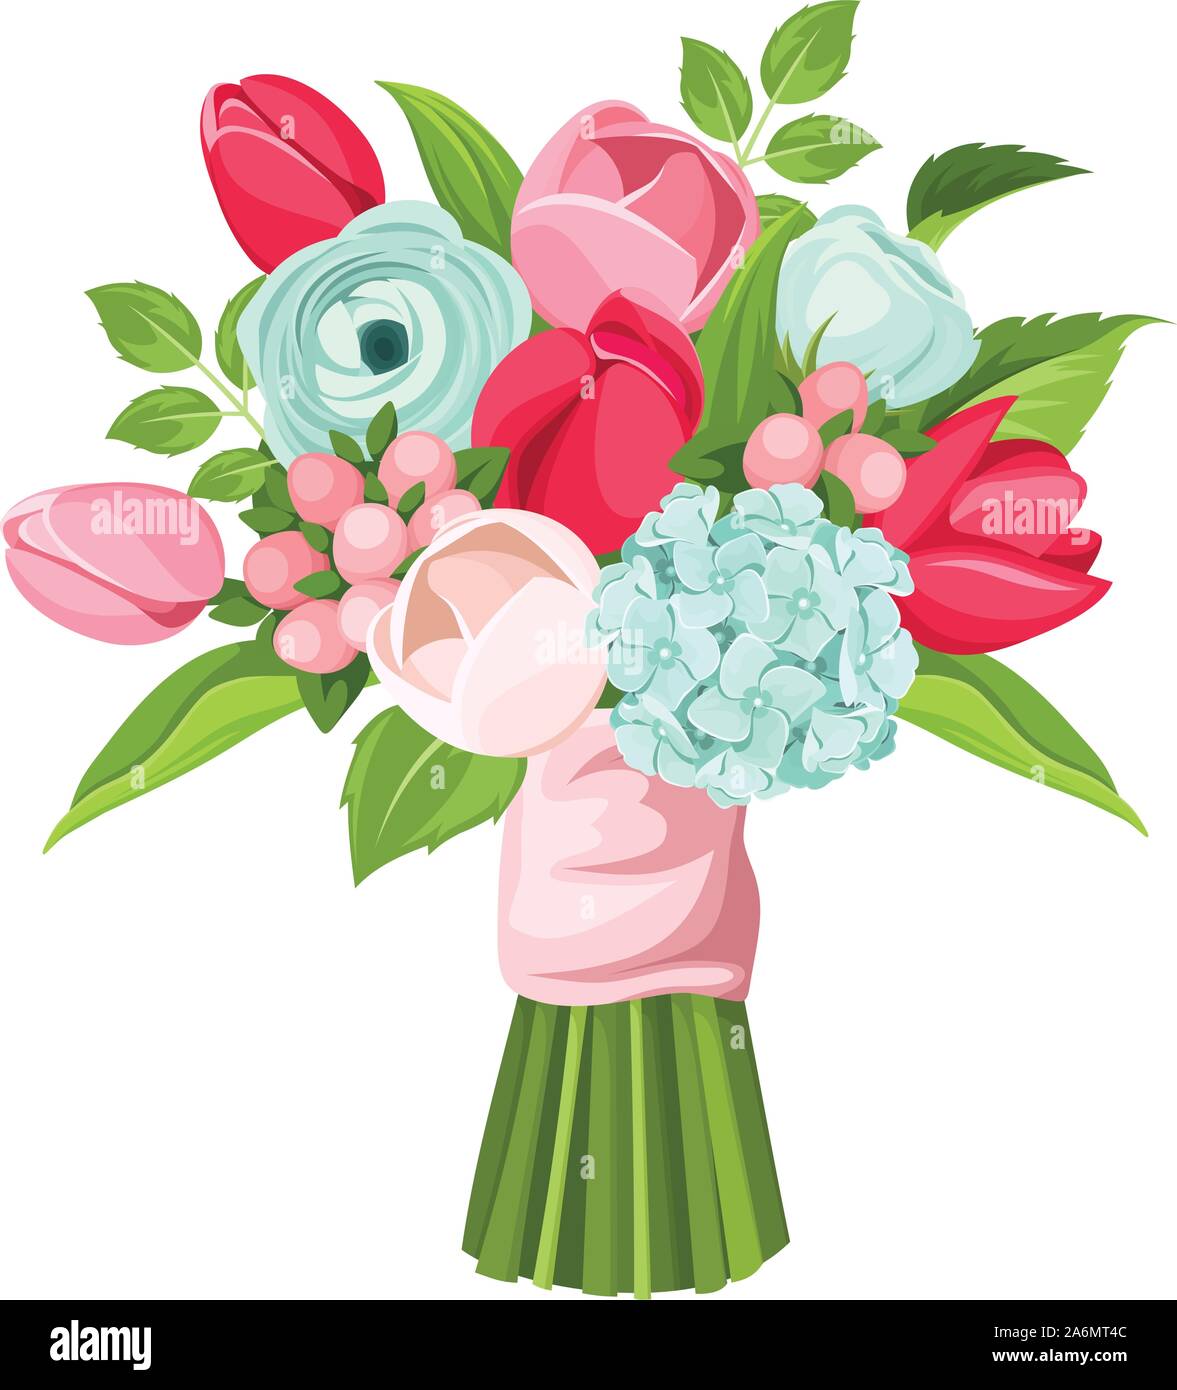 Vector bouquet of red, pink and blue tulips, ranunculus and hydrangea flowers isolated on a white background. Stock Vector